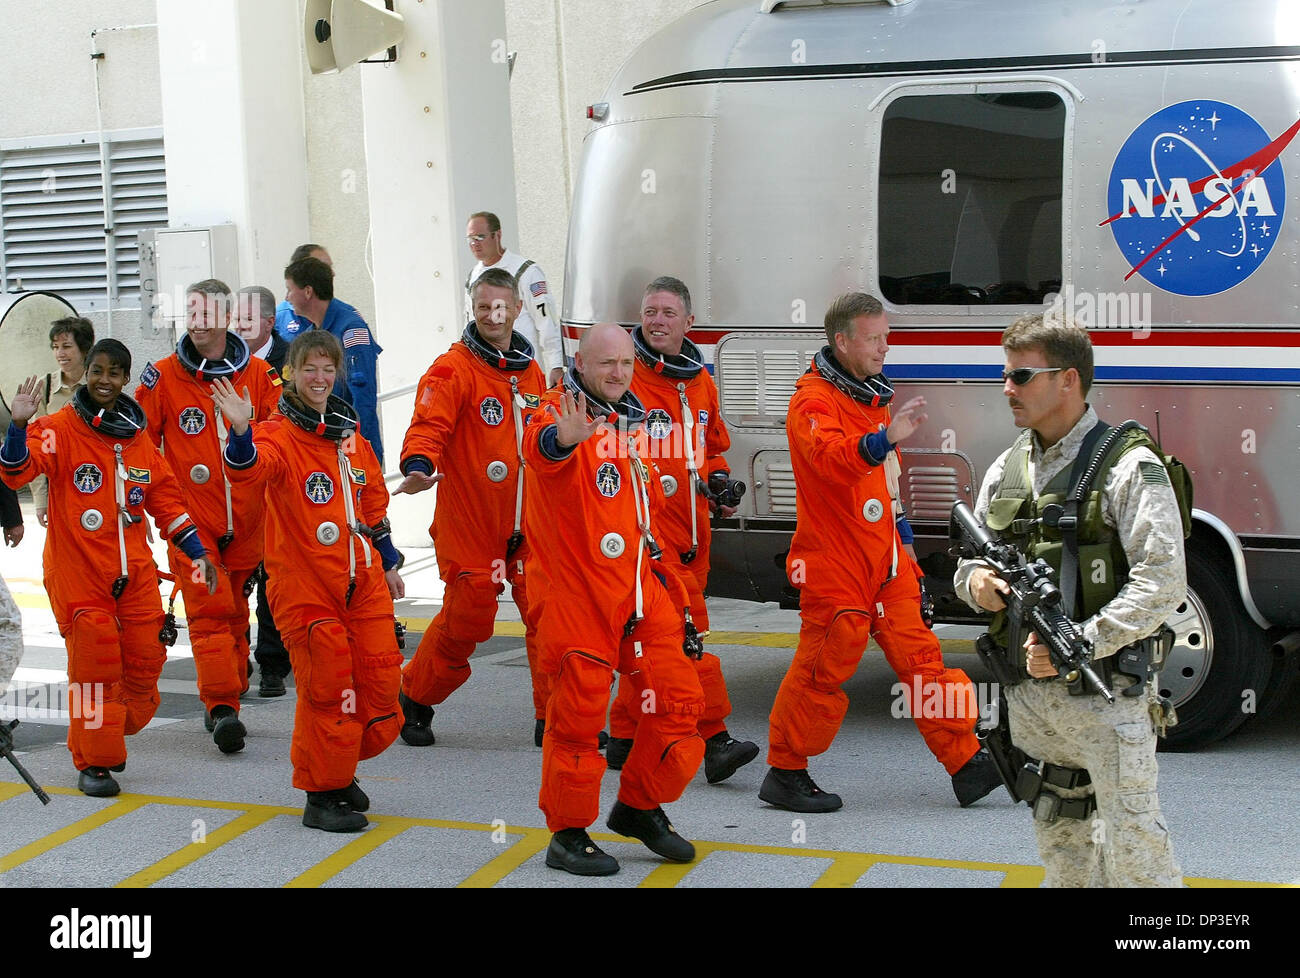 Jul 01, 2006; Cape Canaveral, FL, USA; Space shuttle Discovery crew members walkout Saturday morning on their way to the space craft at Kennedy Space Center. (LtoR) Astronauts Stephanie D. Wilson, Thomas Reiter of Germany, Lisa M. Nowak, Peirs J. Sellers, Mark E. Kelly, Michael E. Fossum, and commander Steven W. Lindsey. Bad weather on Saturday and Sunday forced NASA to reschedule  Stock Photo